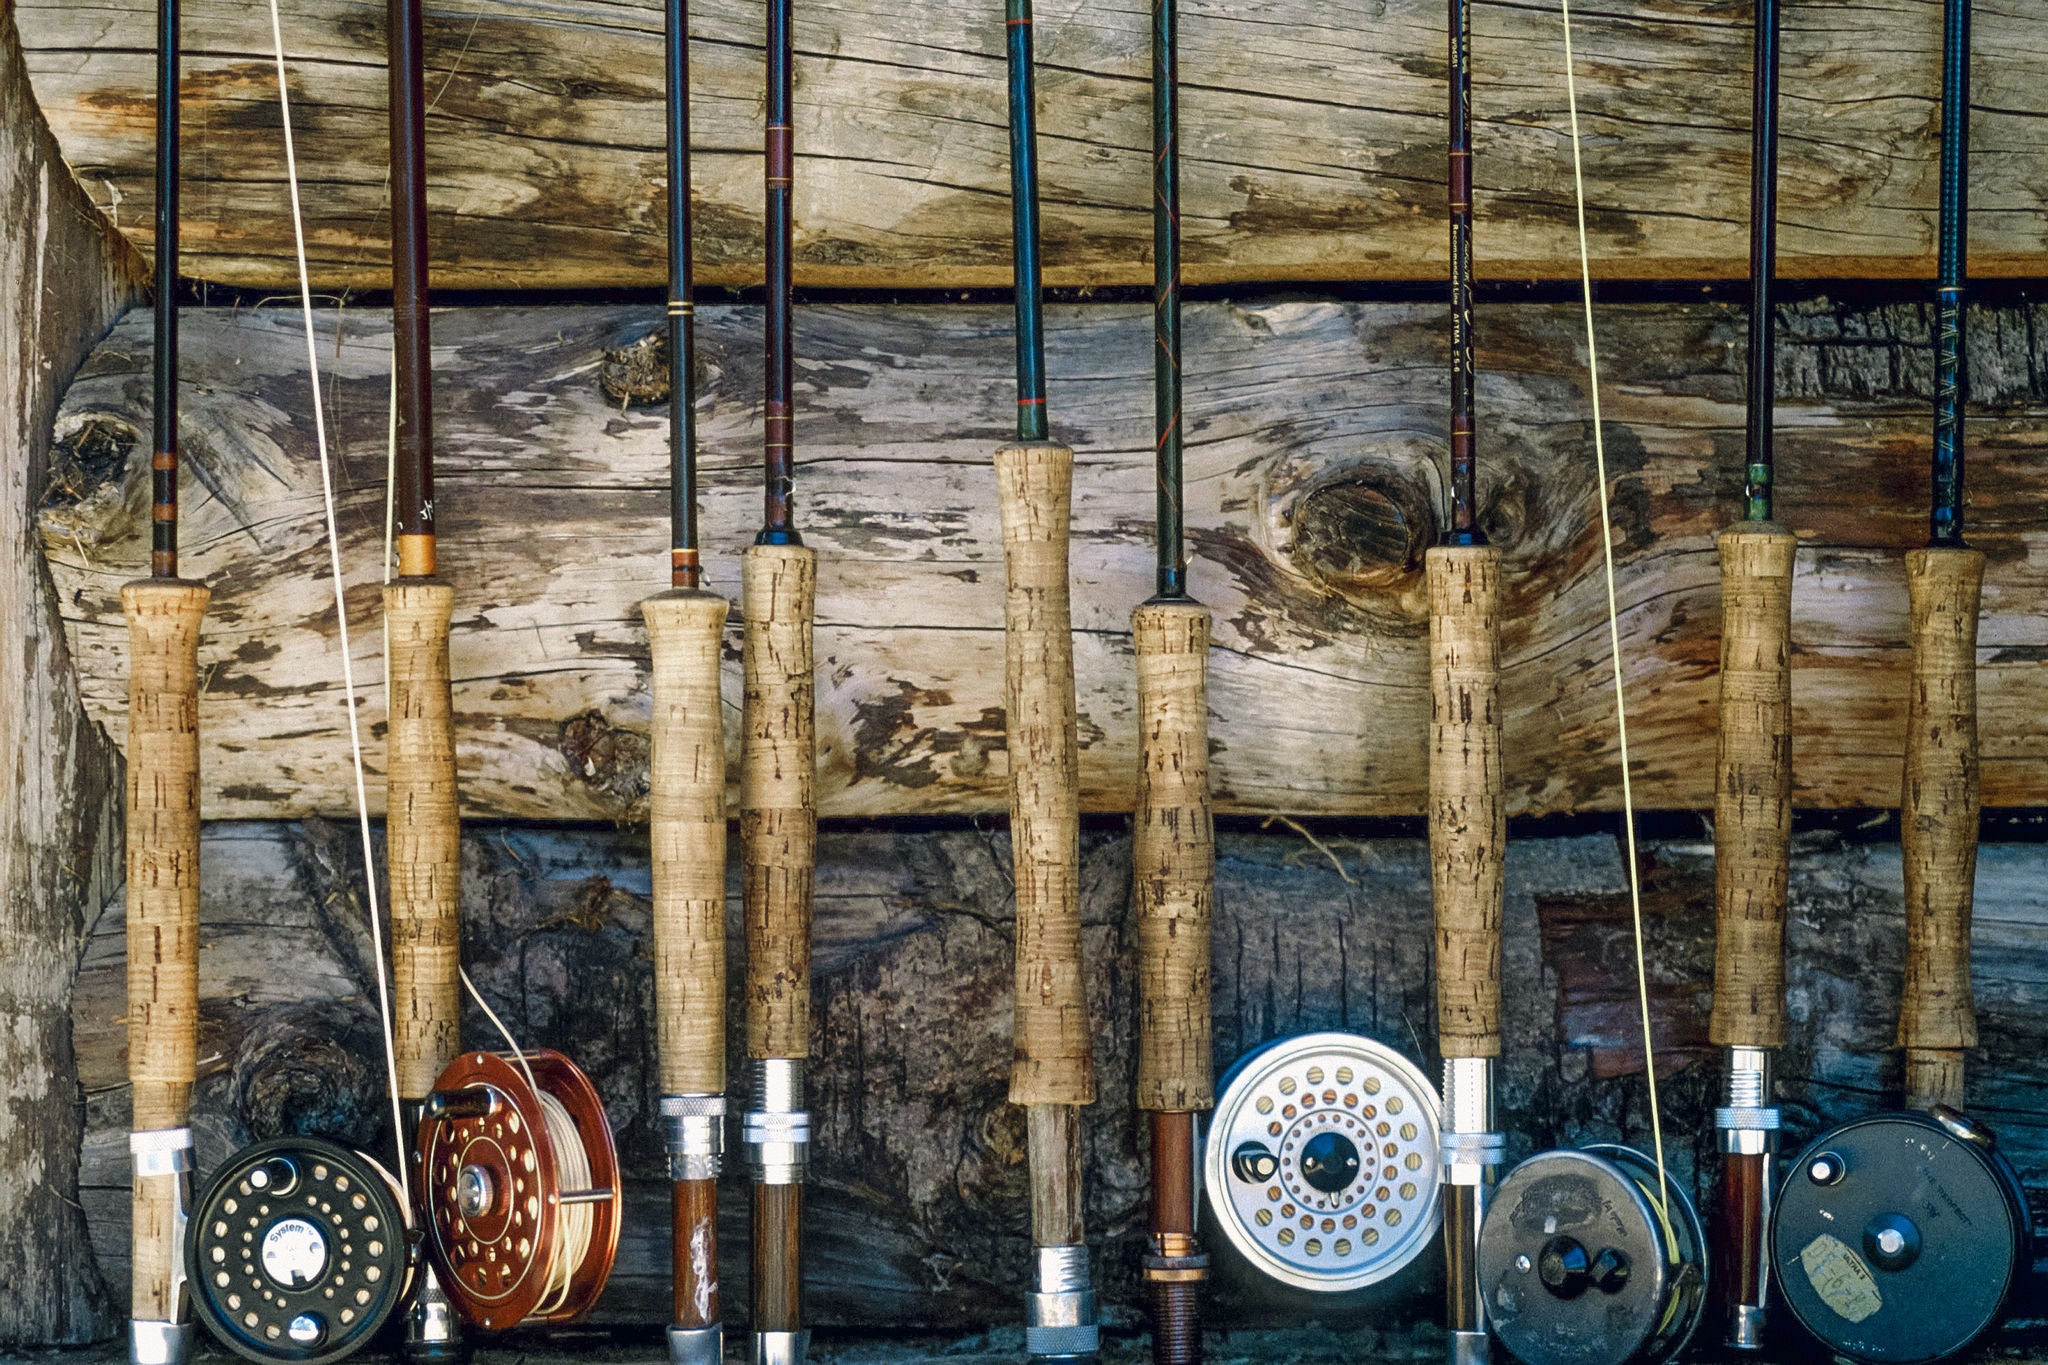 A row of fly fishing poles up along a wall.